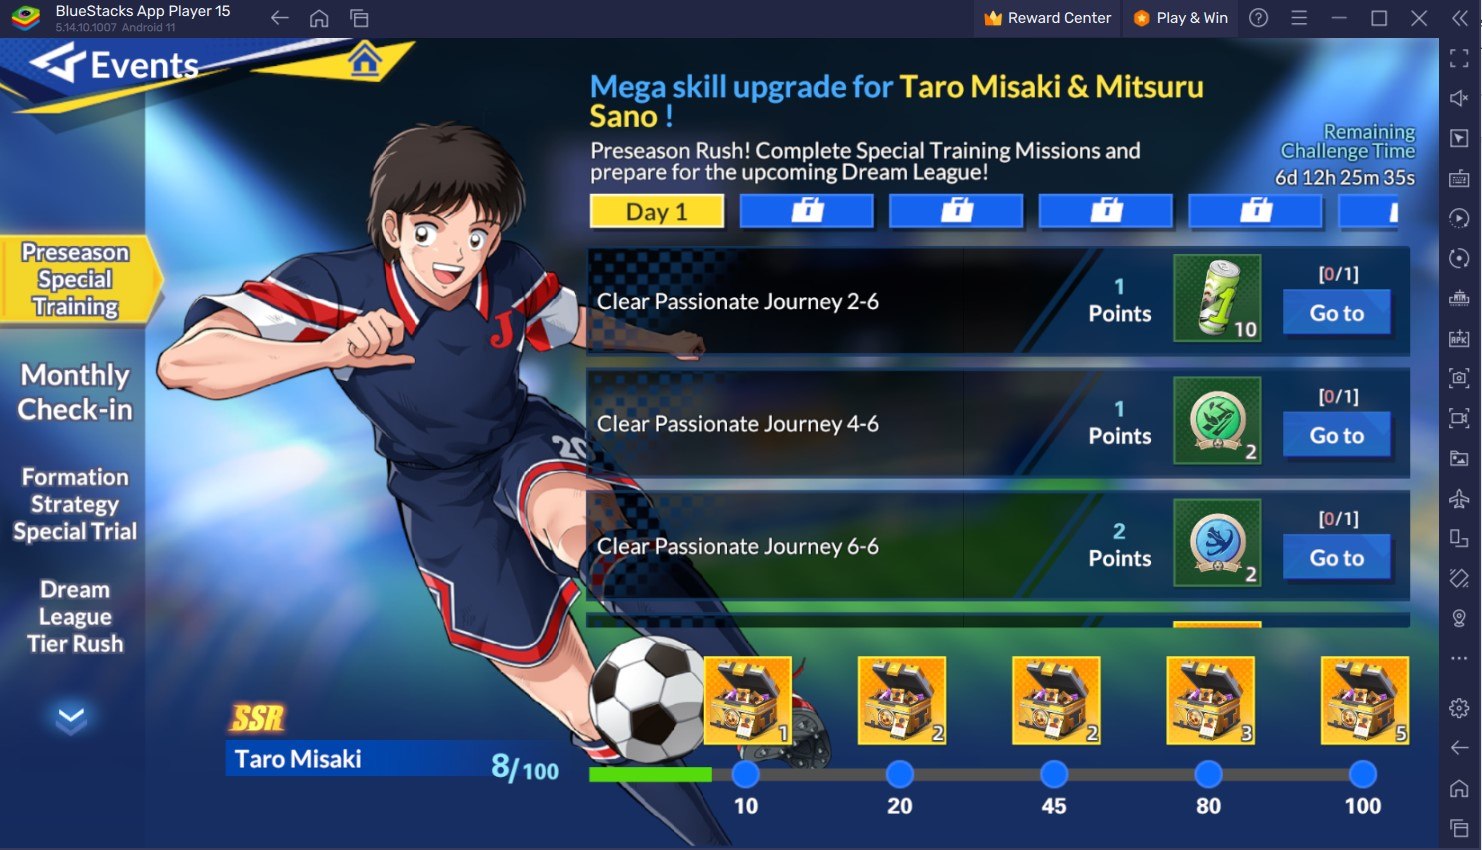 CAPTAIN TSUBASA: ACE – Tips and Tricks to Advance your Skills